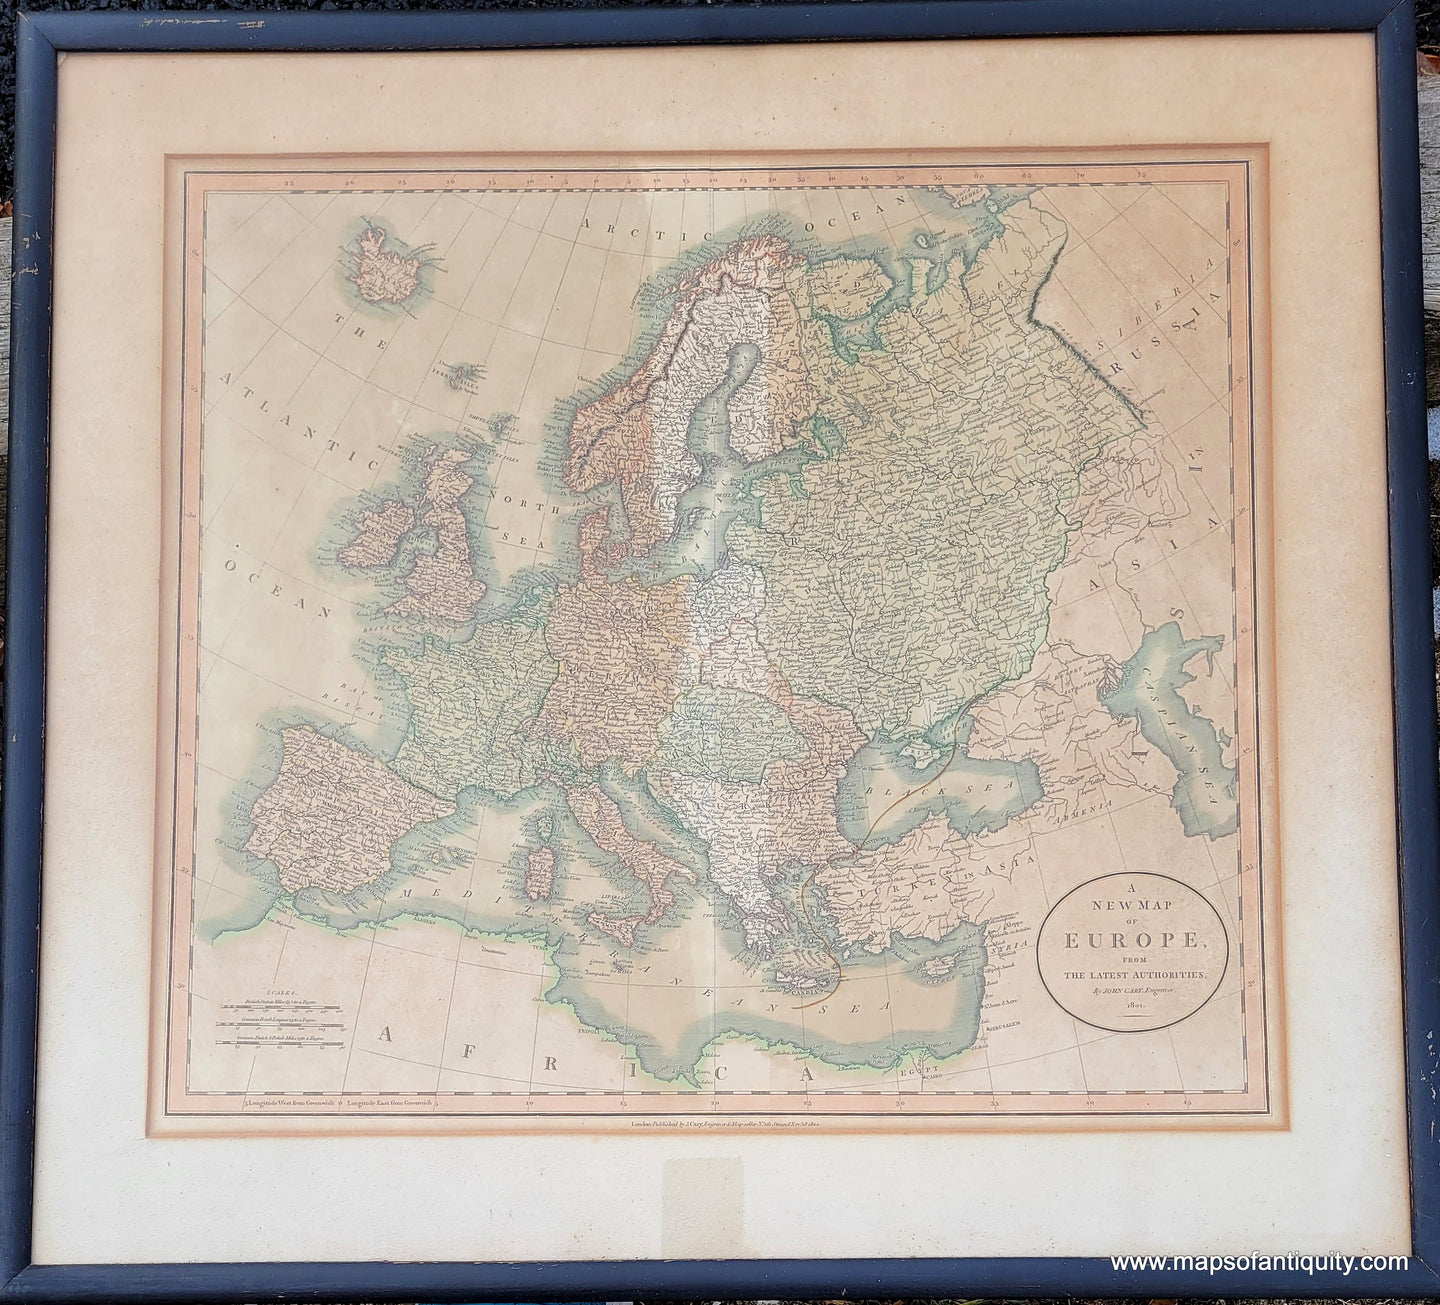 Genuine-Antique-Map-A-New-Map-of-Europe-from-the-Latest-Authorities-1806-Cary-Maps-Of-Antiquity